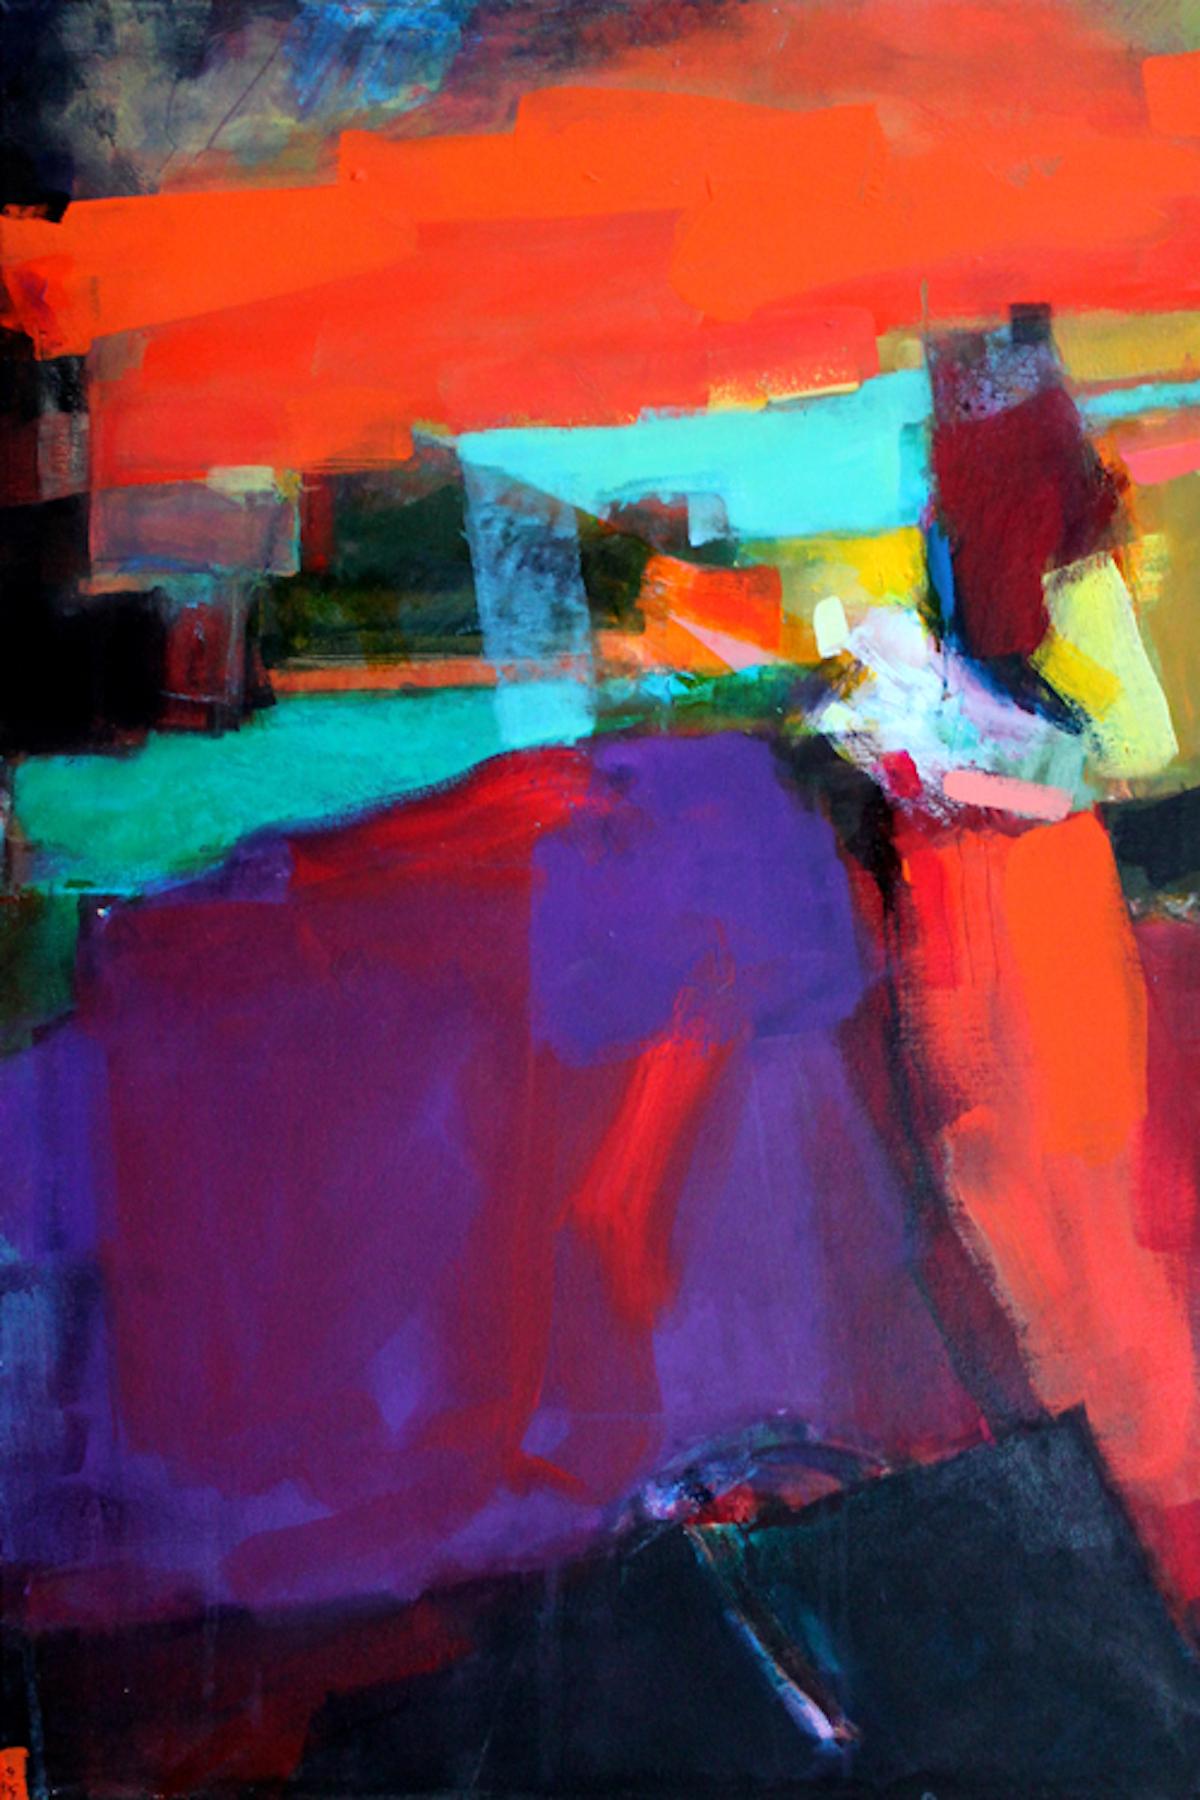 Jon Rowland: Harbour Entry.
Original and hand signed by the artist 

Acrylic on canvas: unframed

Size: H:75cm cm x W:50cm cm

This is one of a series of pictures that Jon recently painted in Venice. This is an abstracted view of one of the historic